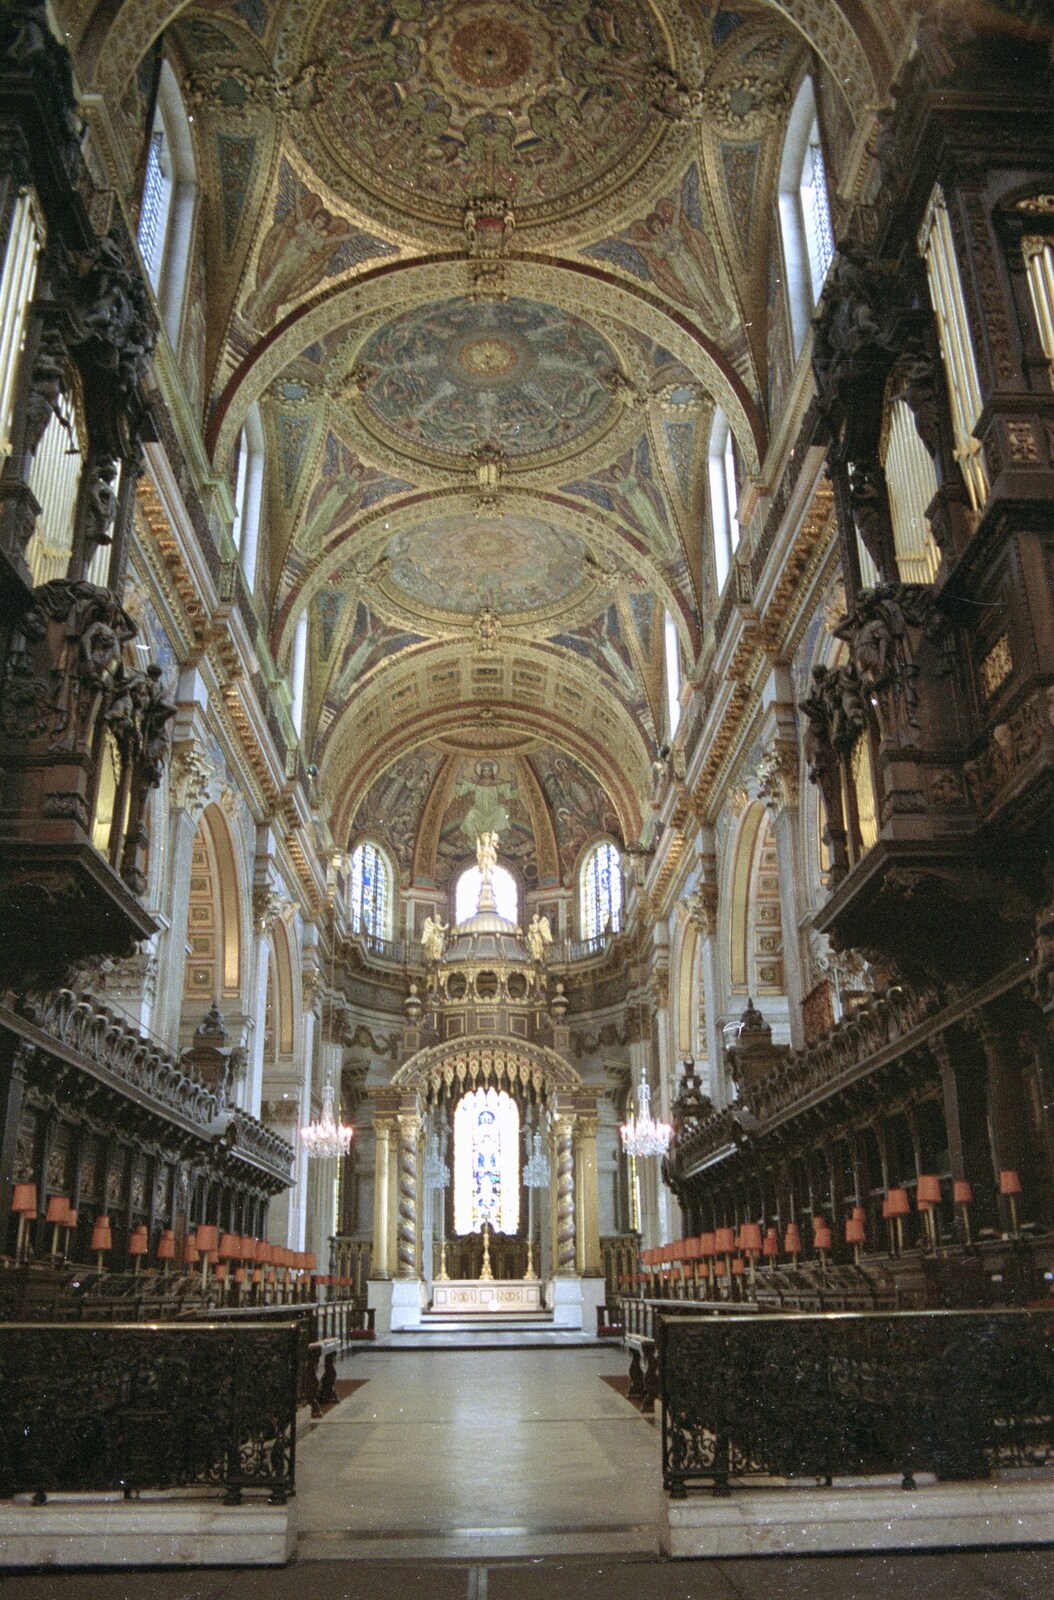 The grand nave of St. Paul's from Kenny's Nibbles, St. Paul's and Sean's, Farnborough, London and Diss - 19th March 1990